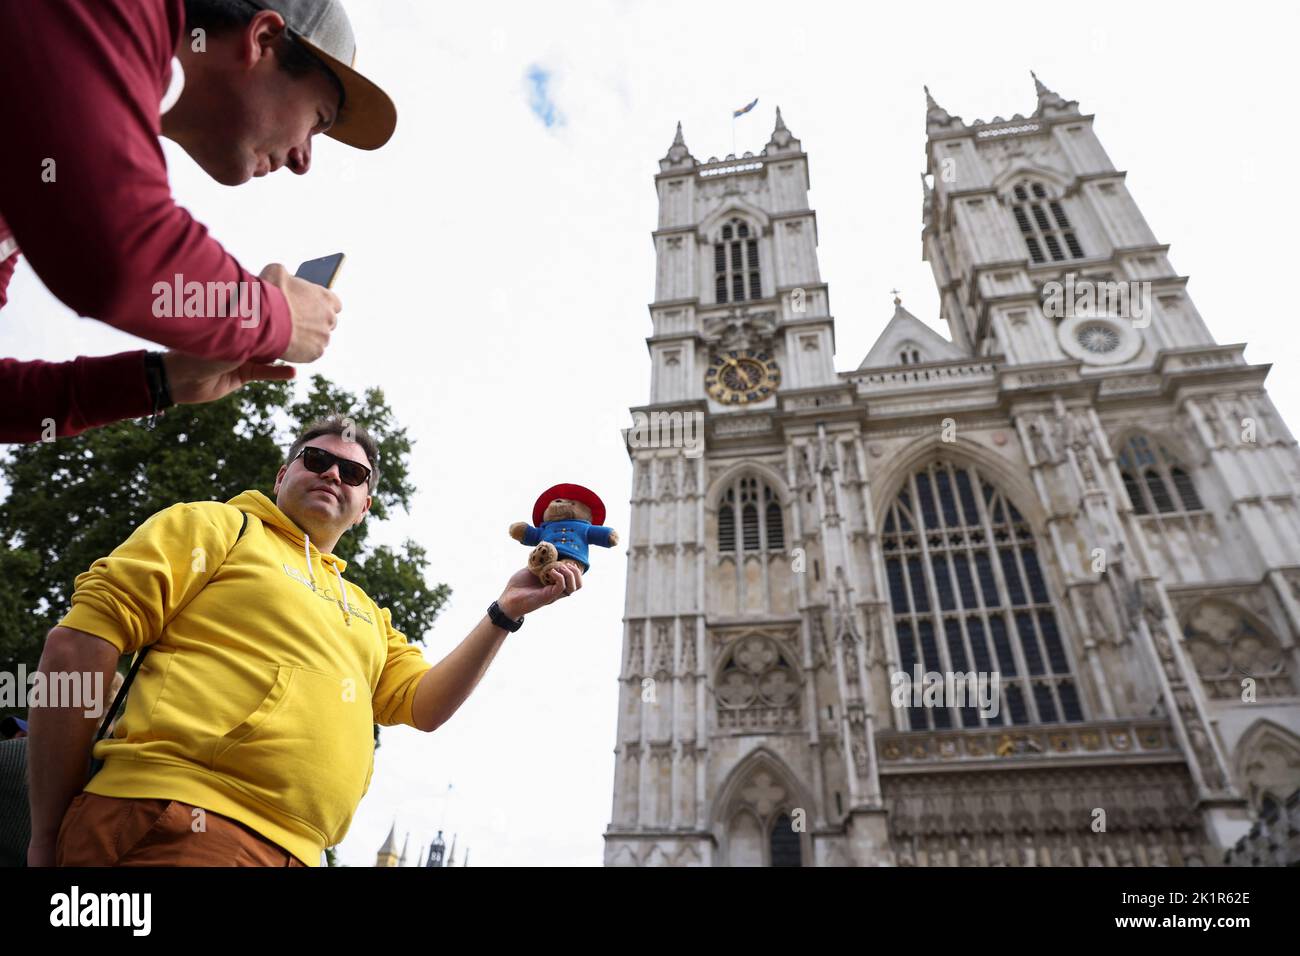 A man poses for a picture with a Paddington Bear toy outside Westminster Abbey, following the funeral of Britain's Queen Elizabeth, in London, Britain September 20, 2022. REUTERS/Tom Nicholson Stock Photo